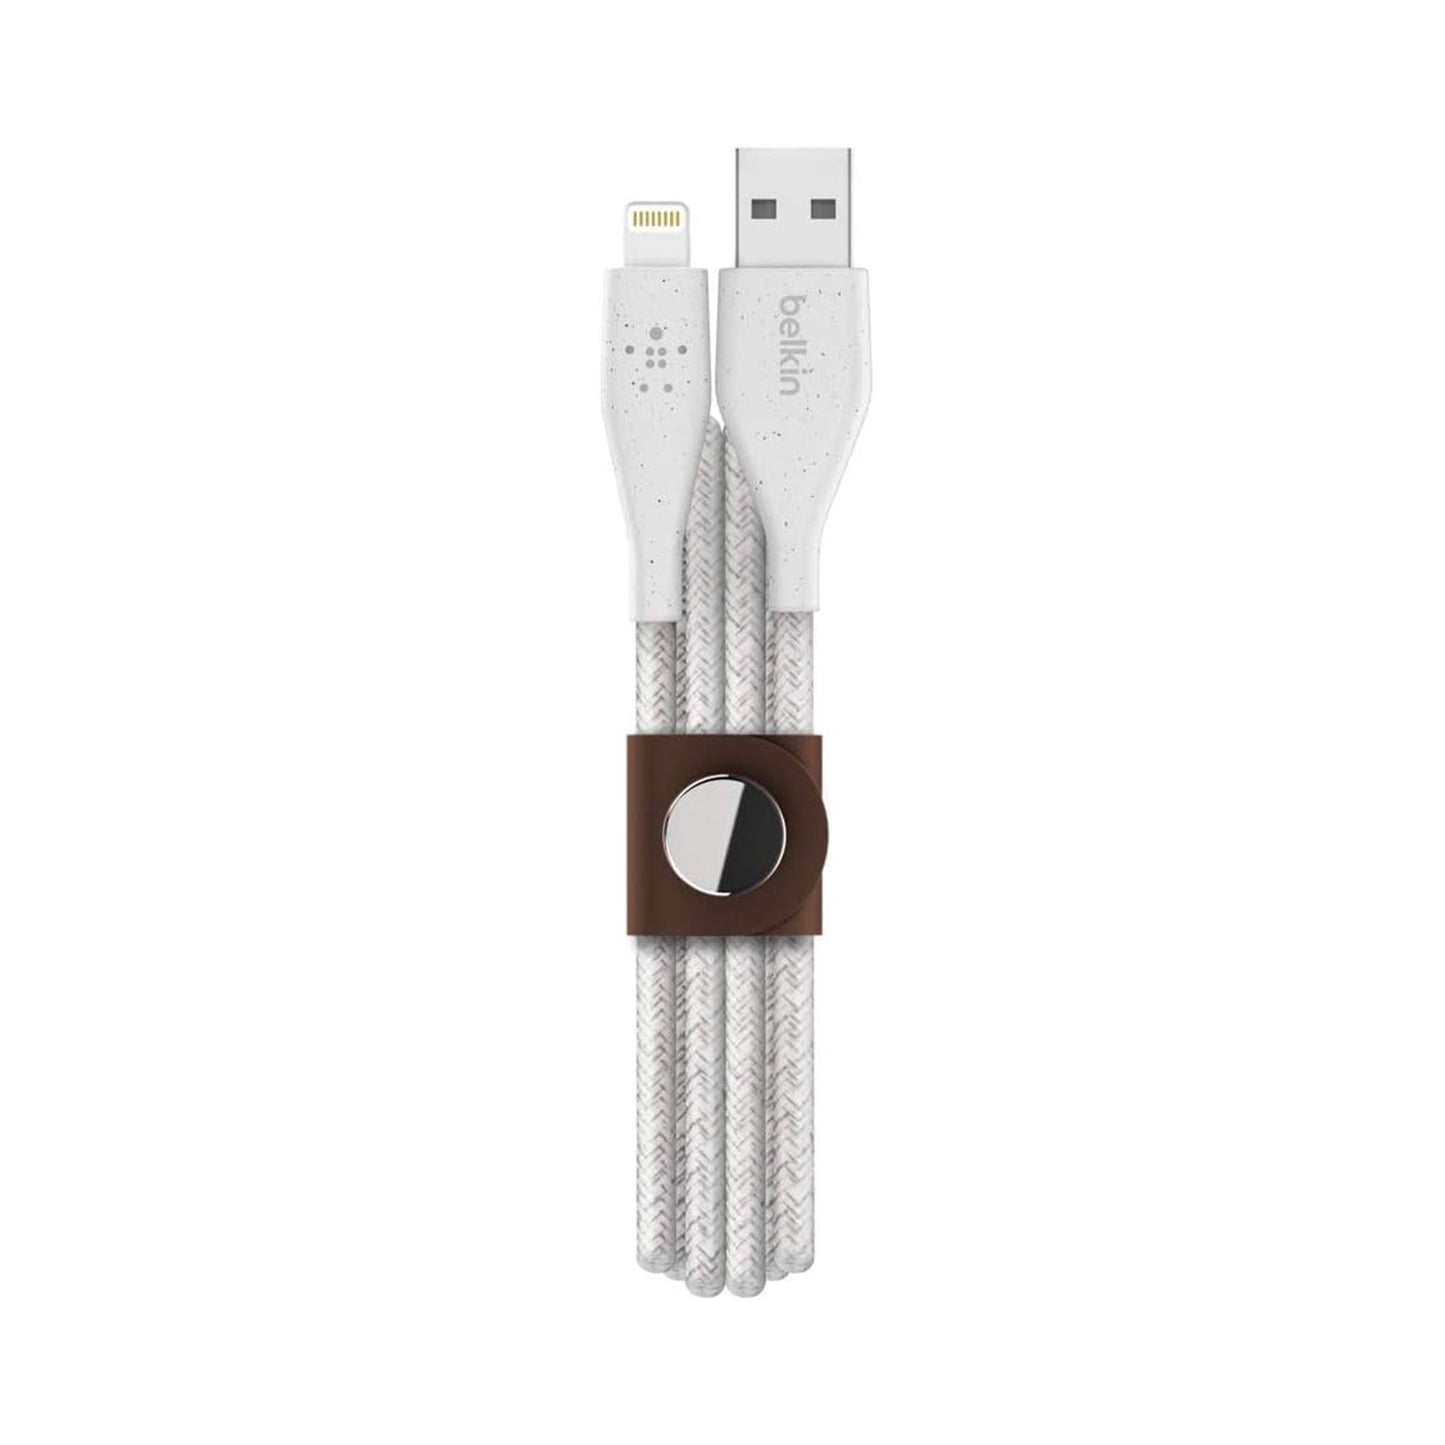 BELKIN Duratek Plus Lightning to USB-A Cable with Strap 6ft - White